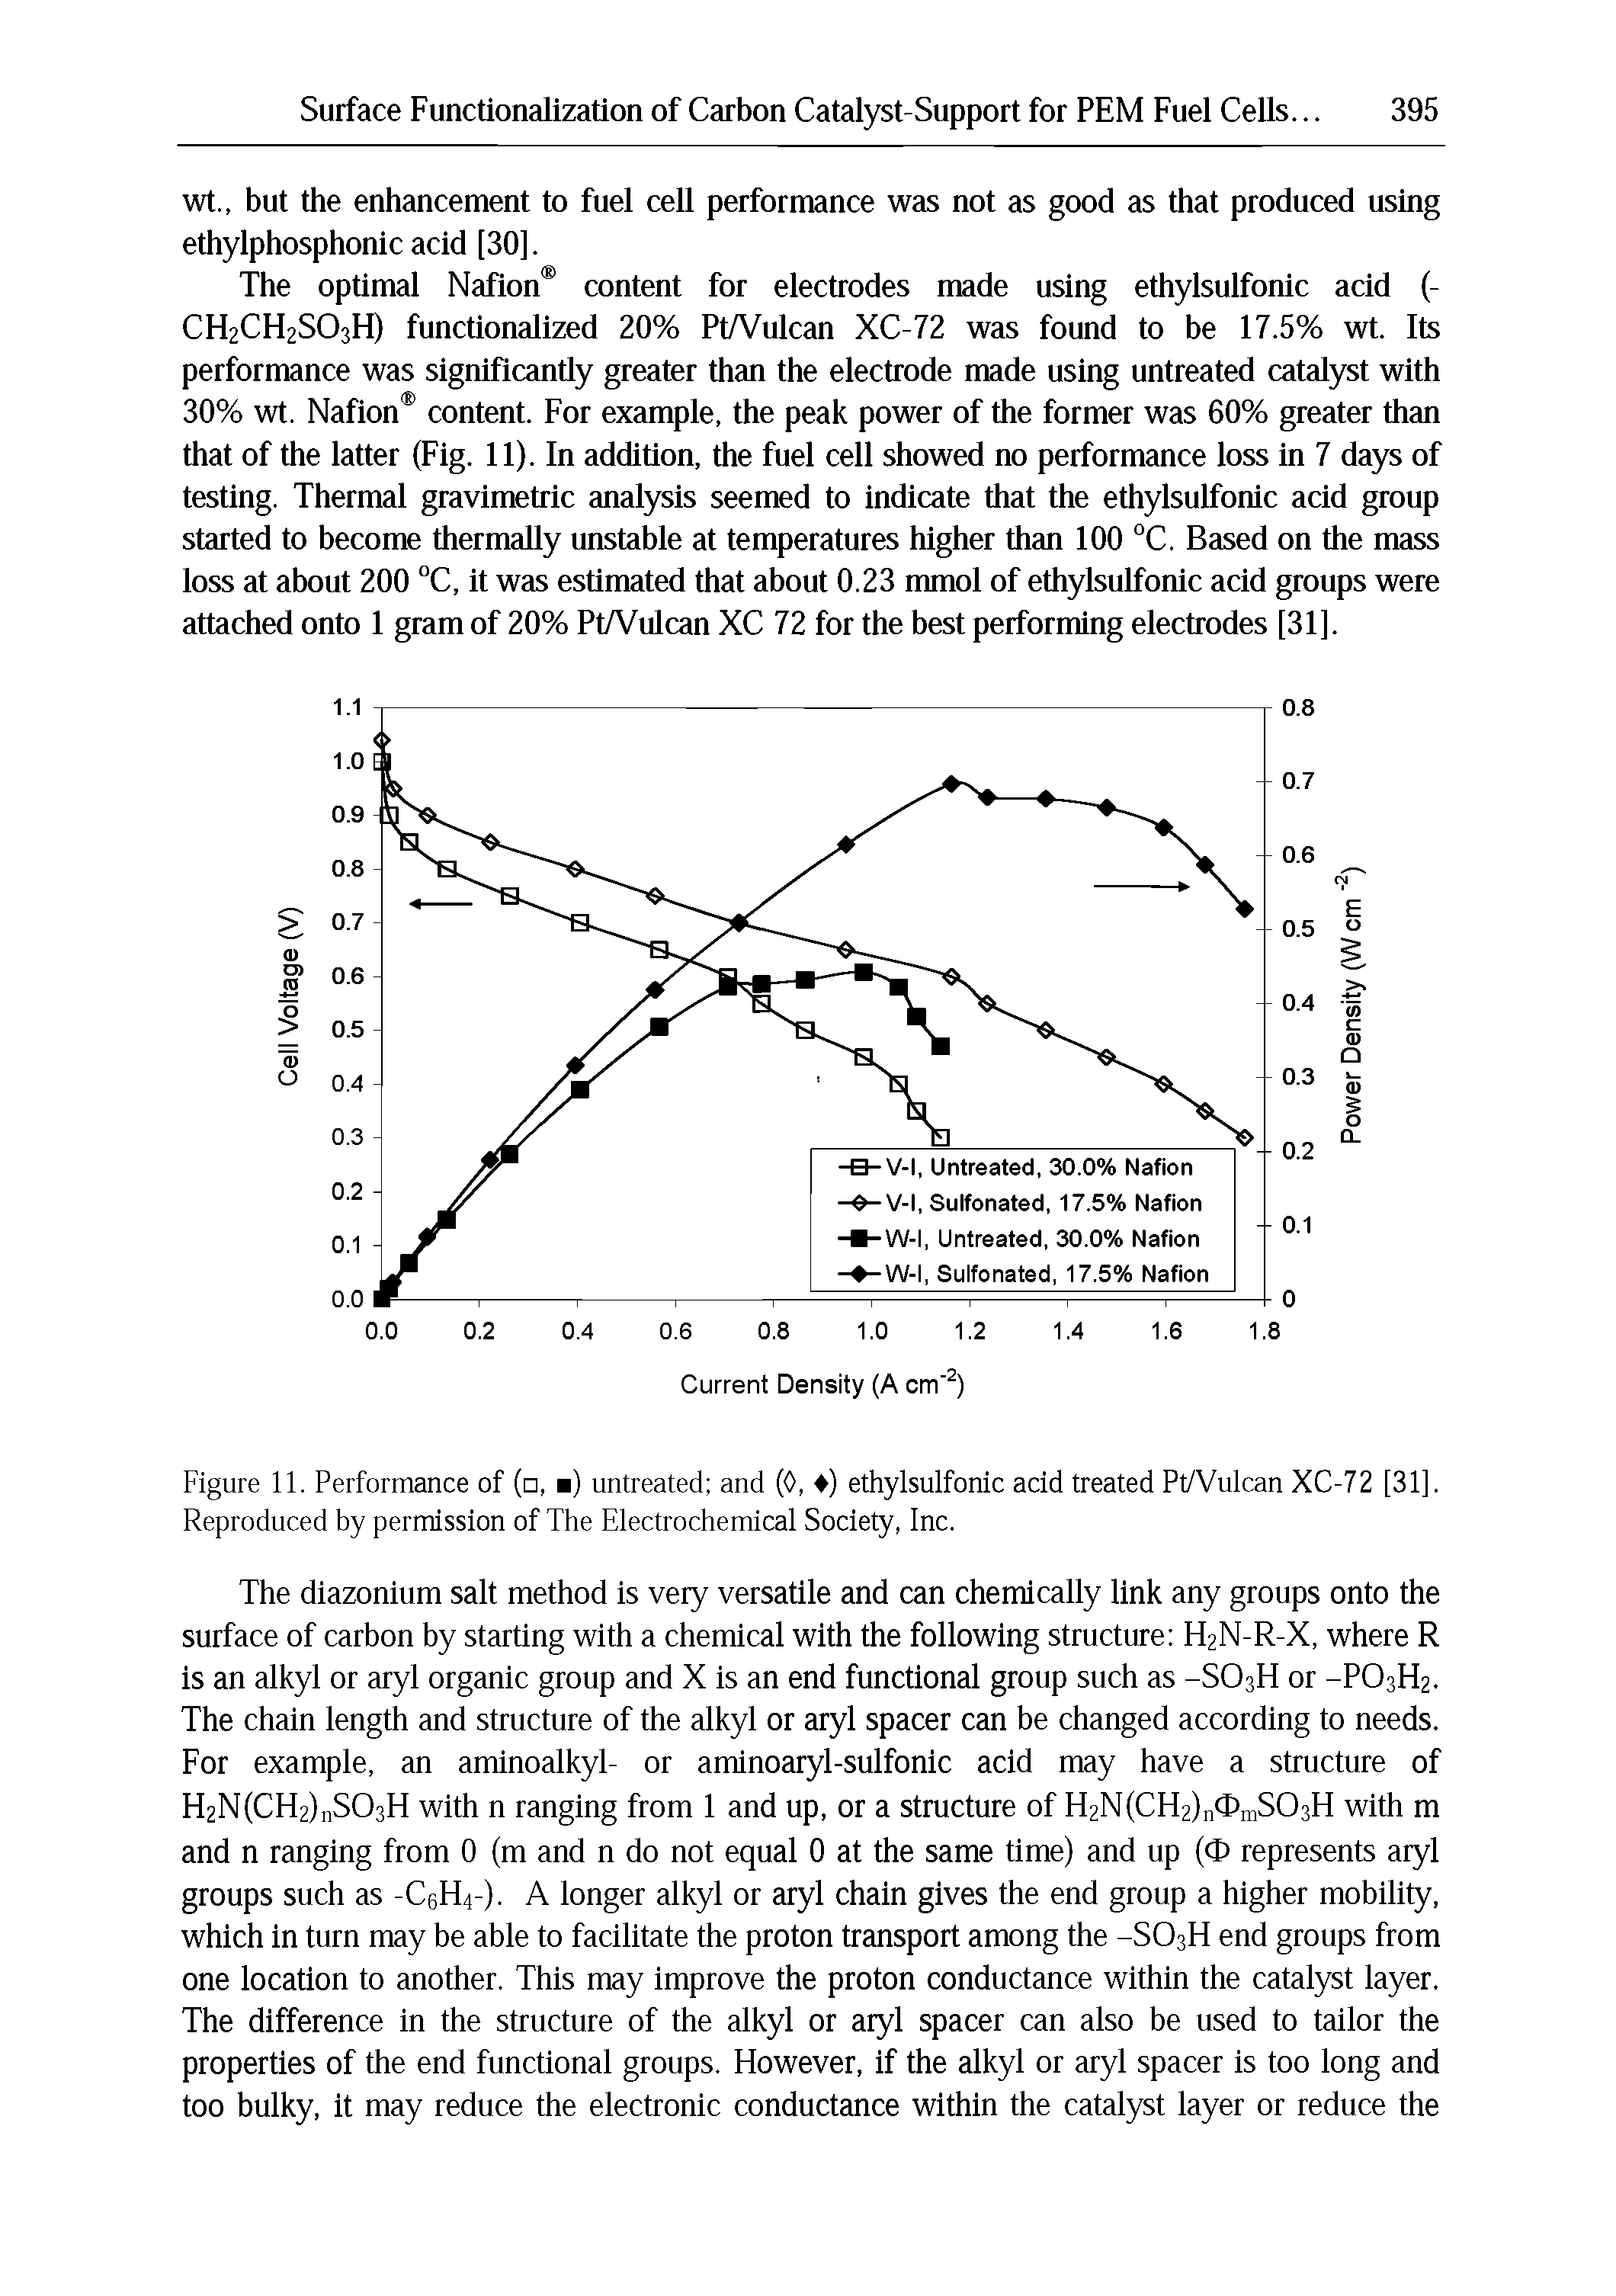 Figure 11. Performance of ( , ) untreated and (0, ) ethylsulfonic acid treated Pt/Vulcan XC-72 [31]. Reproduced by permission of The Electrochemical Society, Inc.